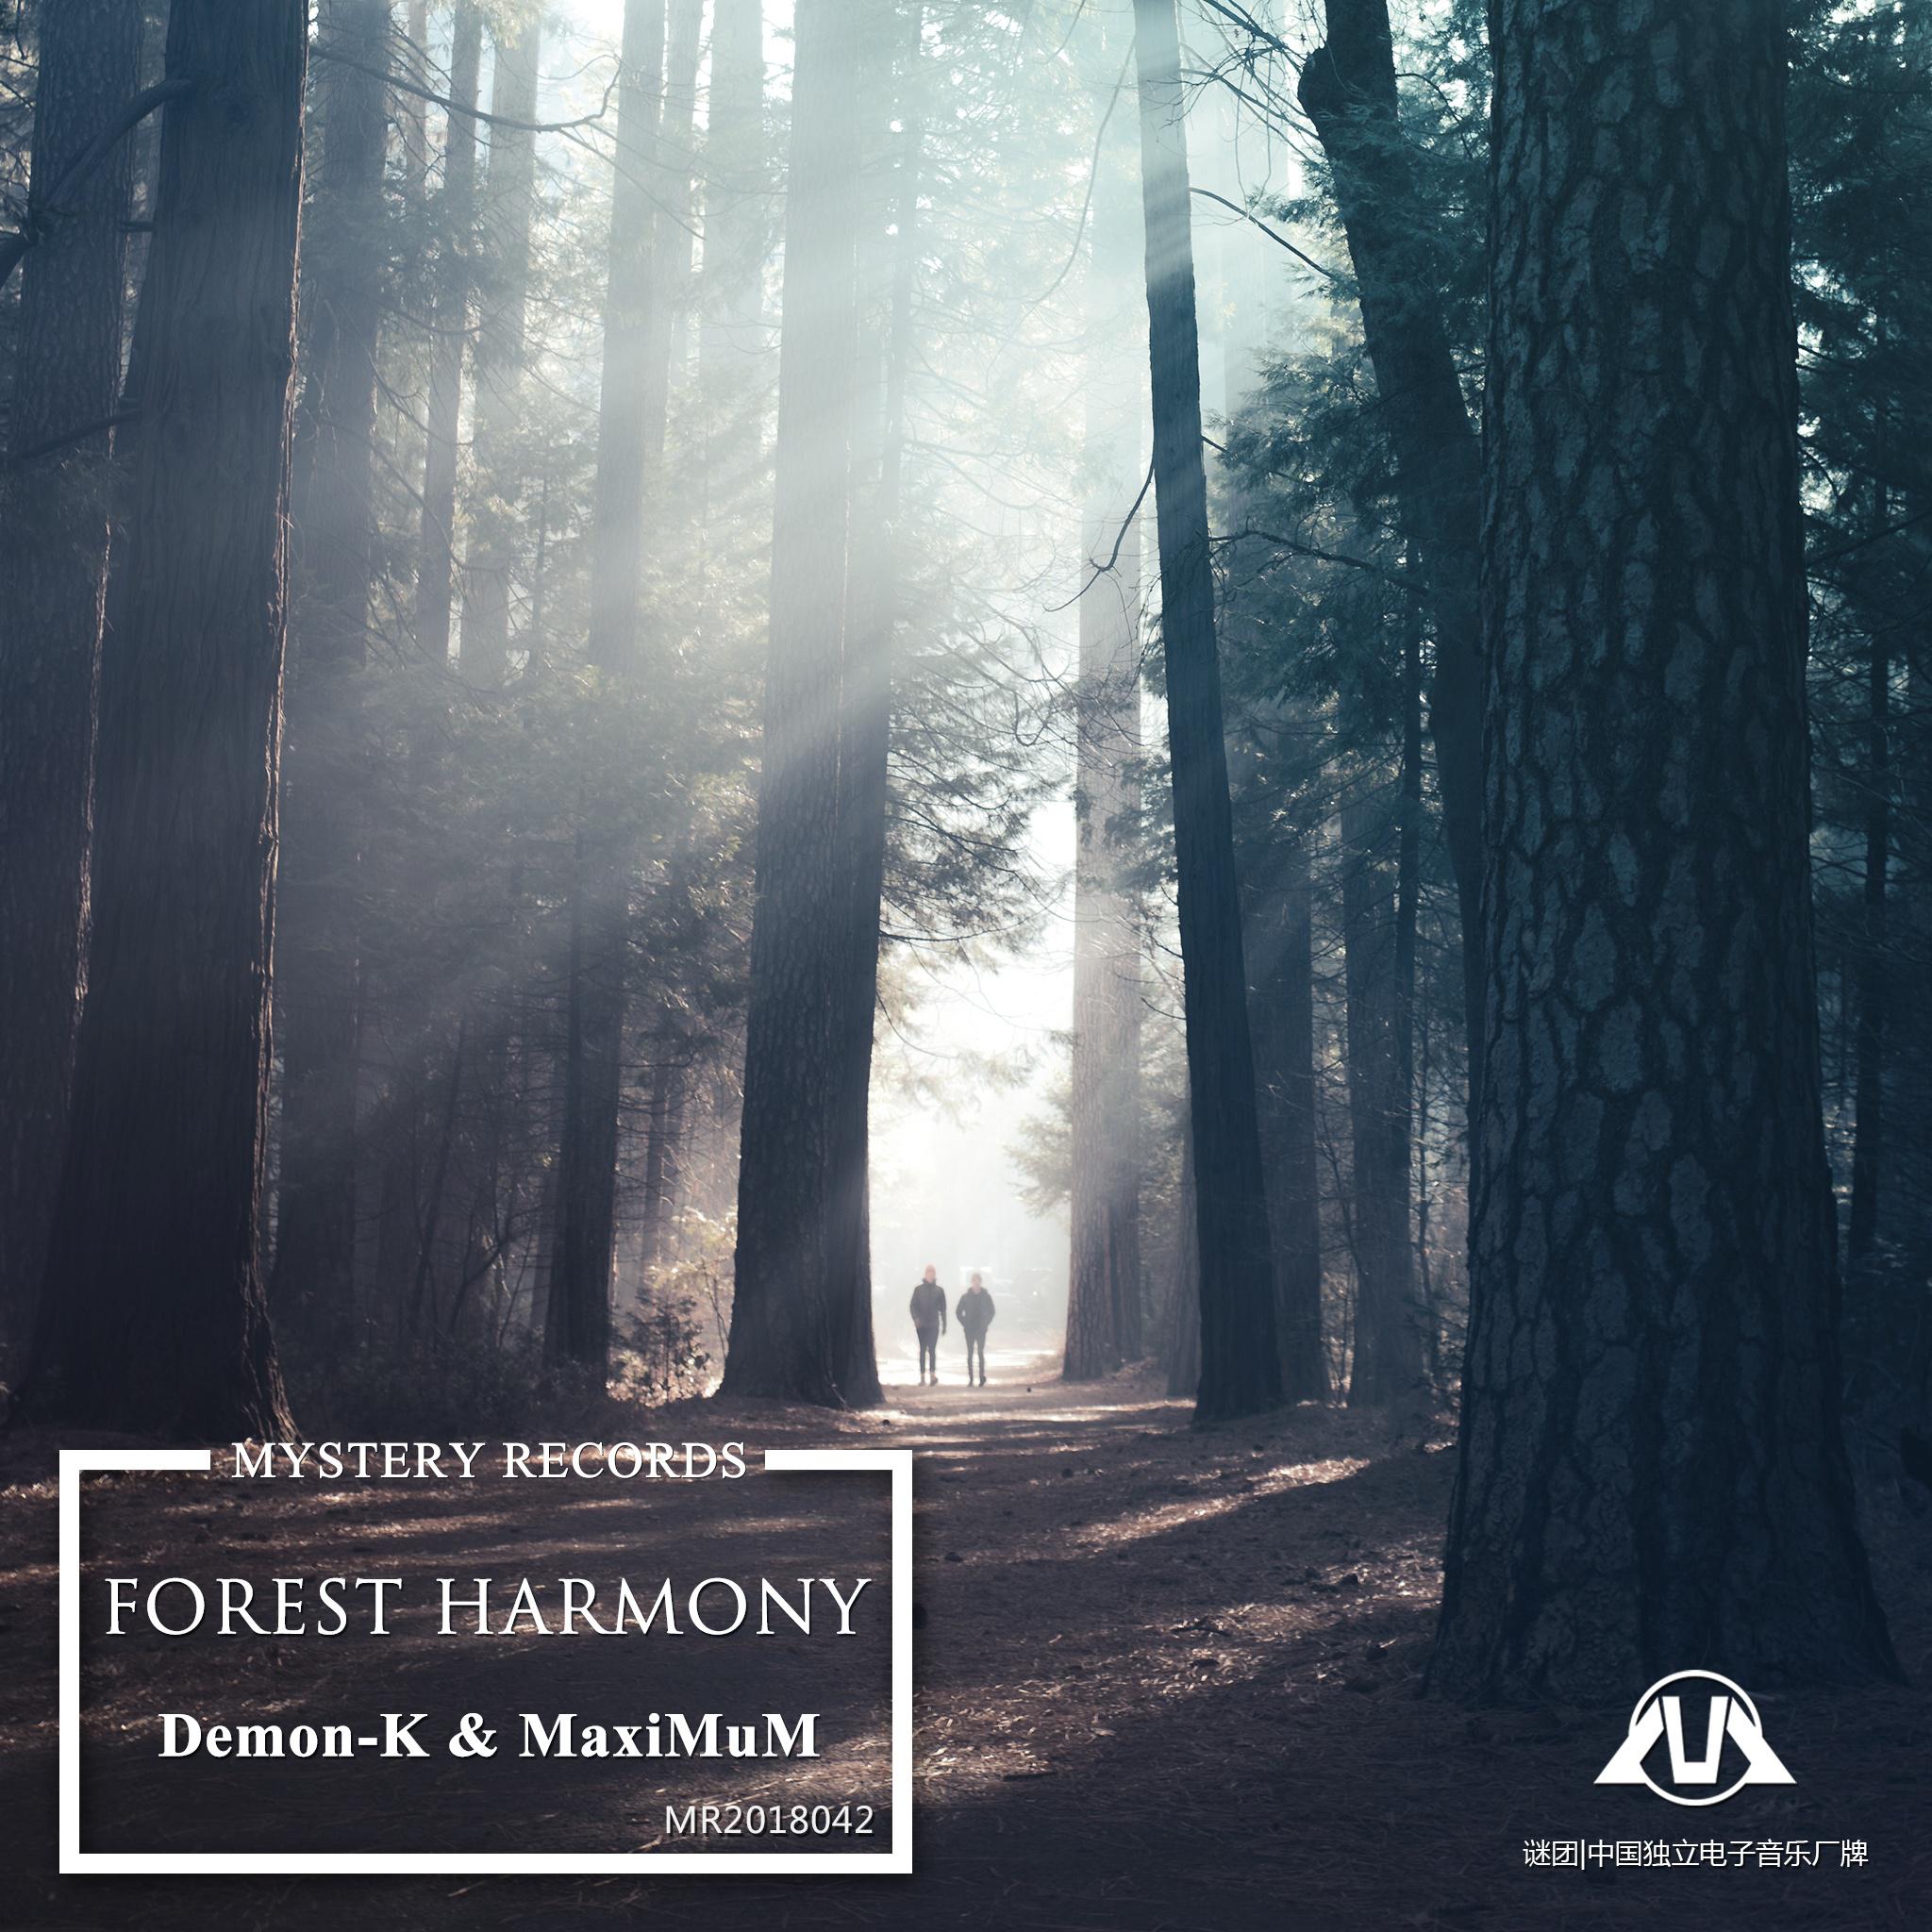 Forest harmony